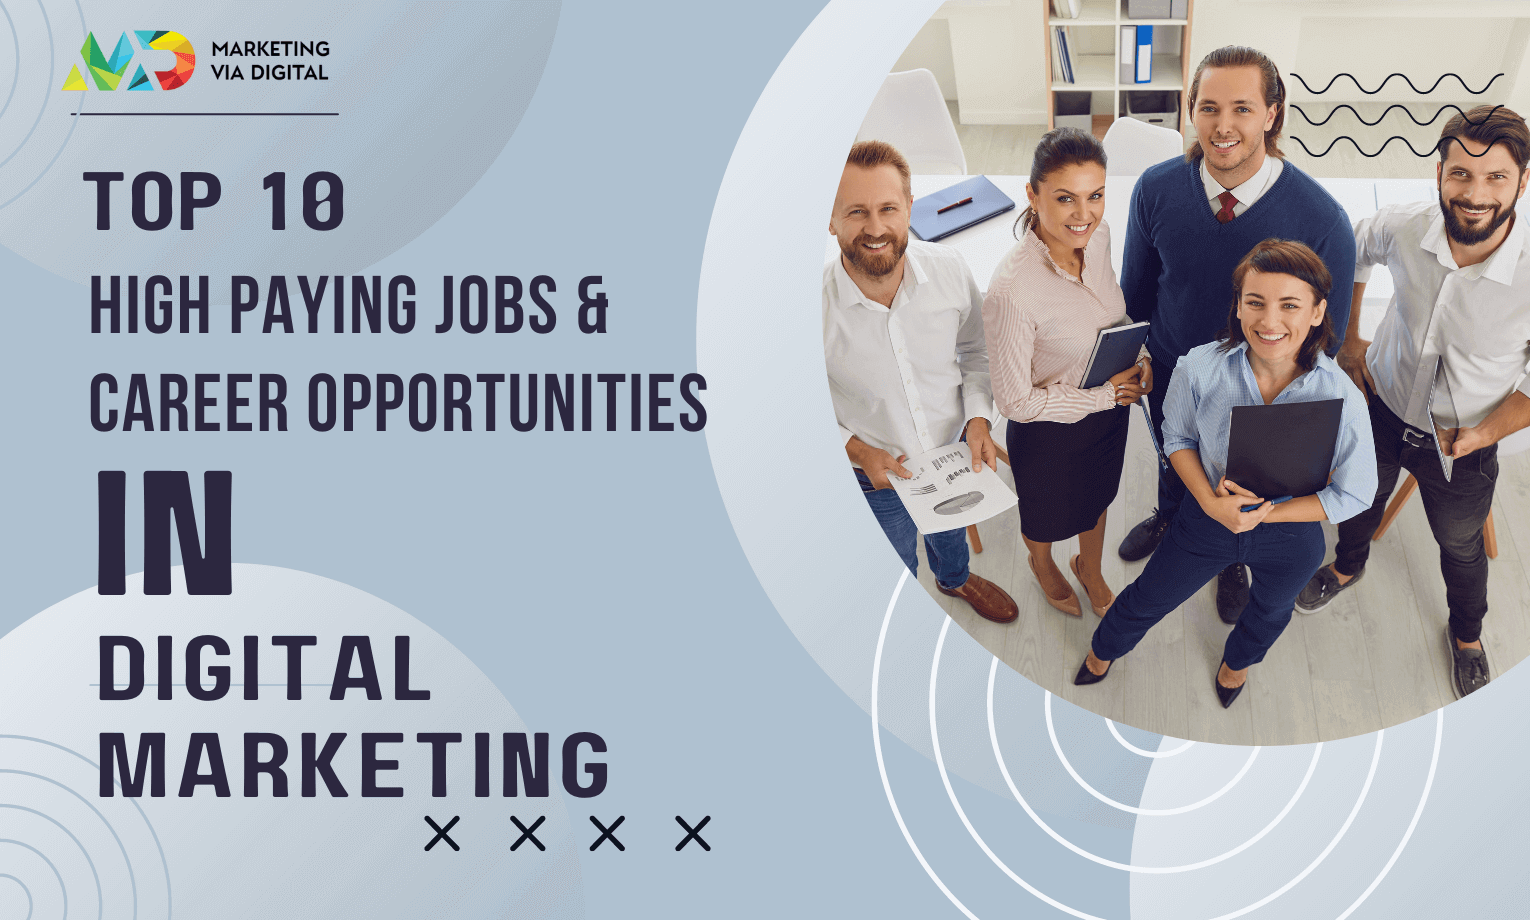 High Paying Jobs & Career Opportunities in Digital Marketing